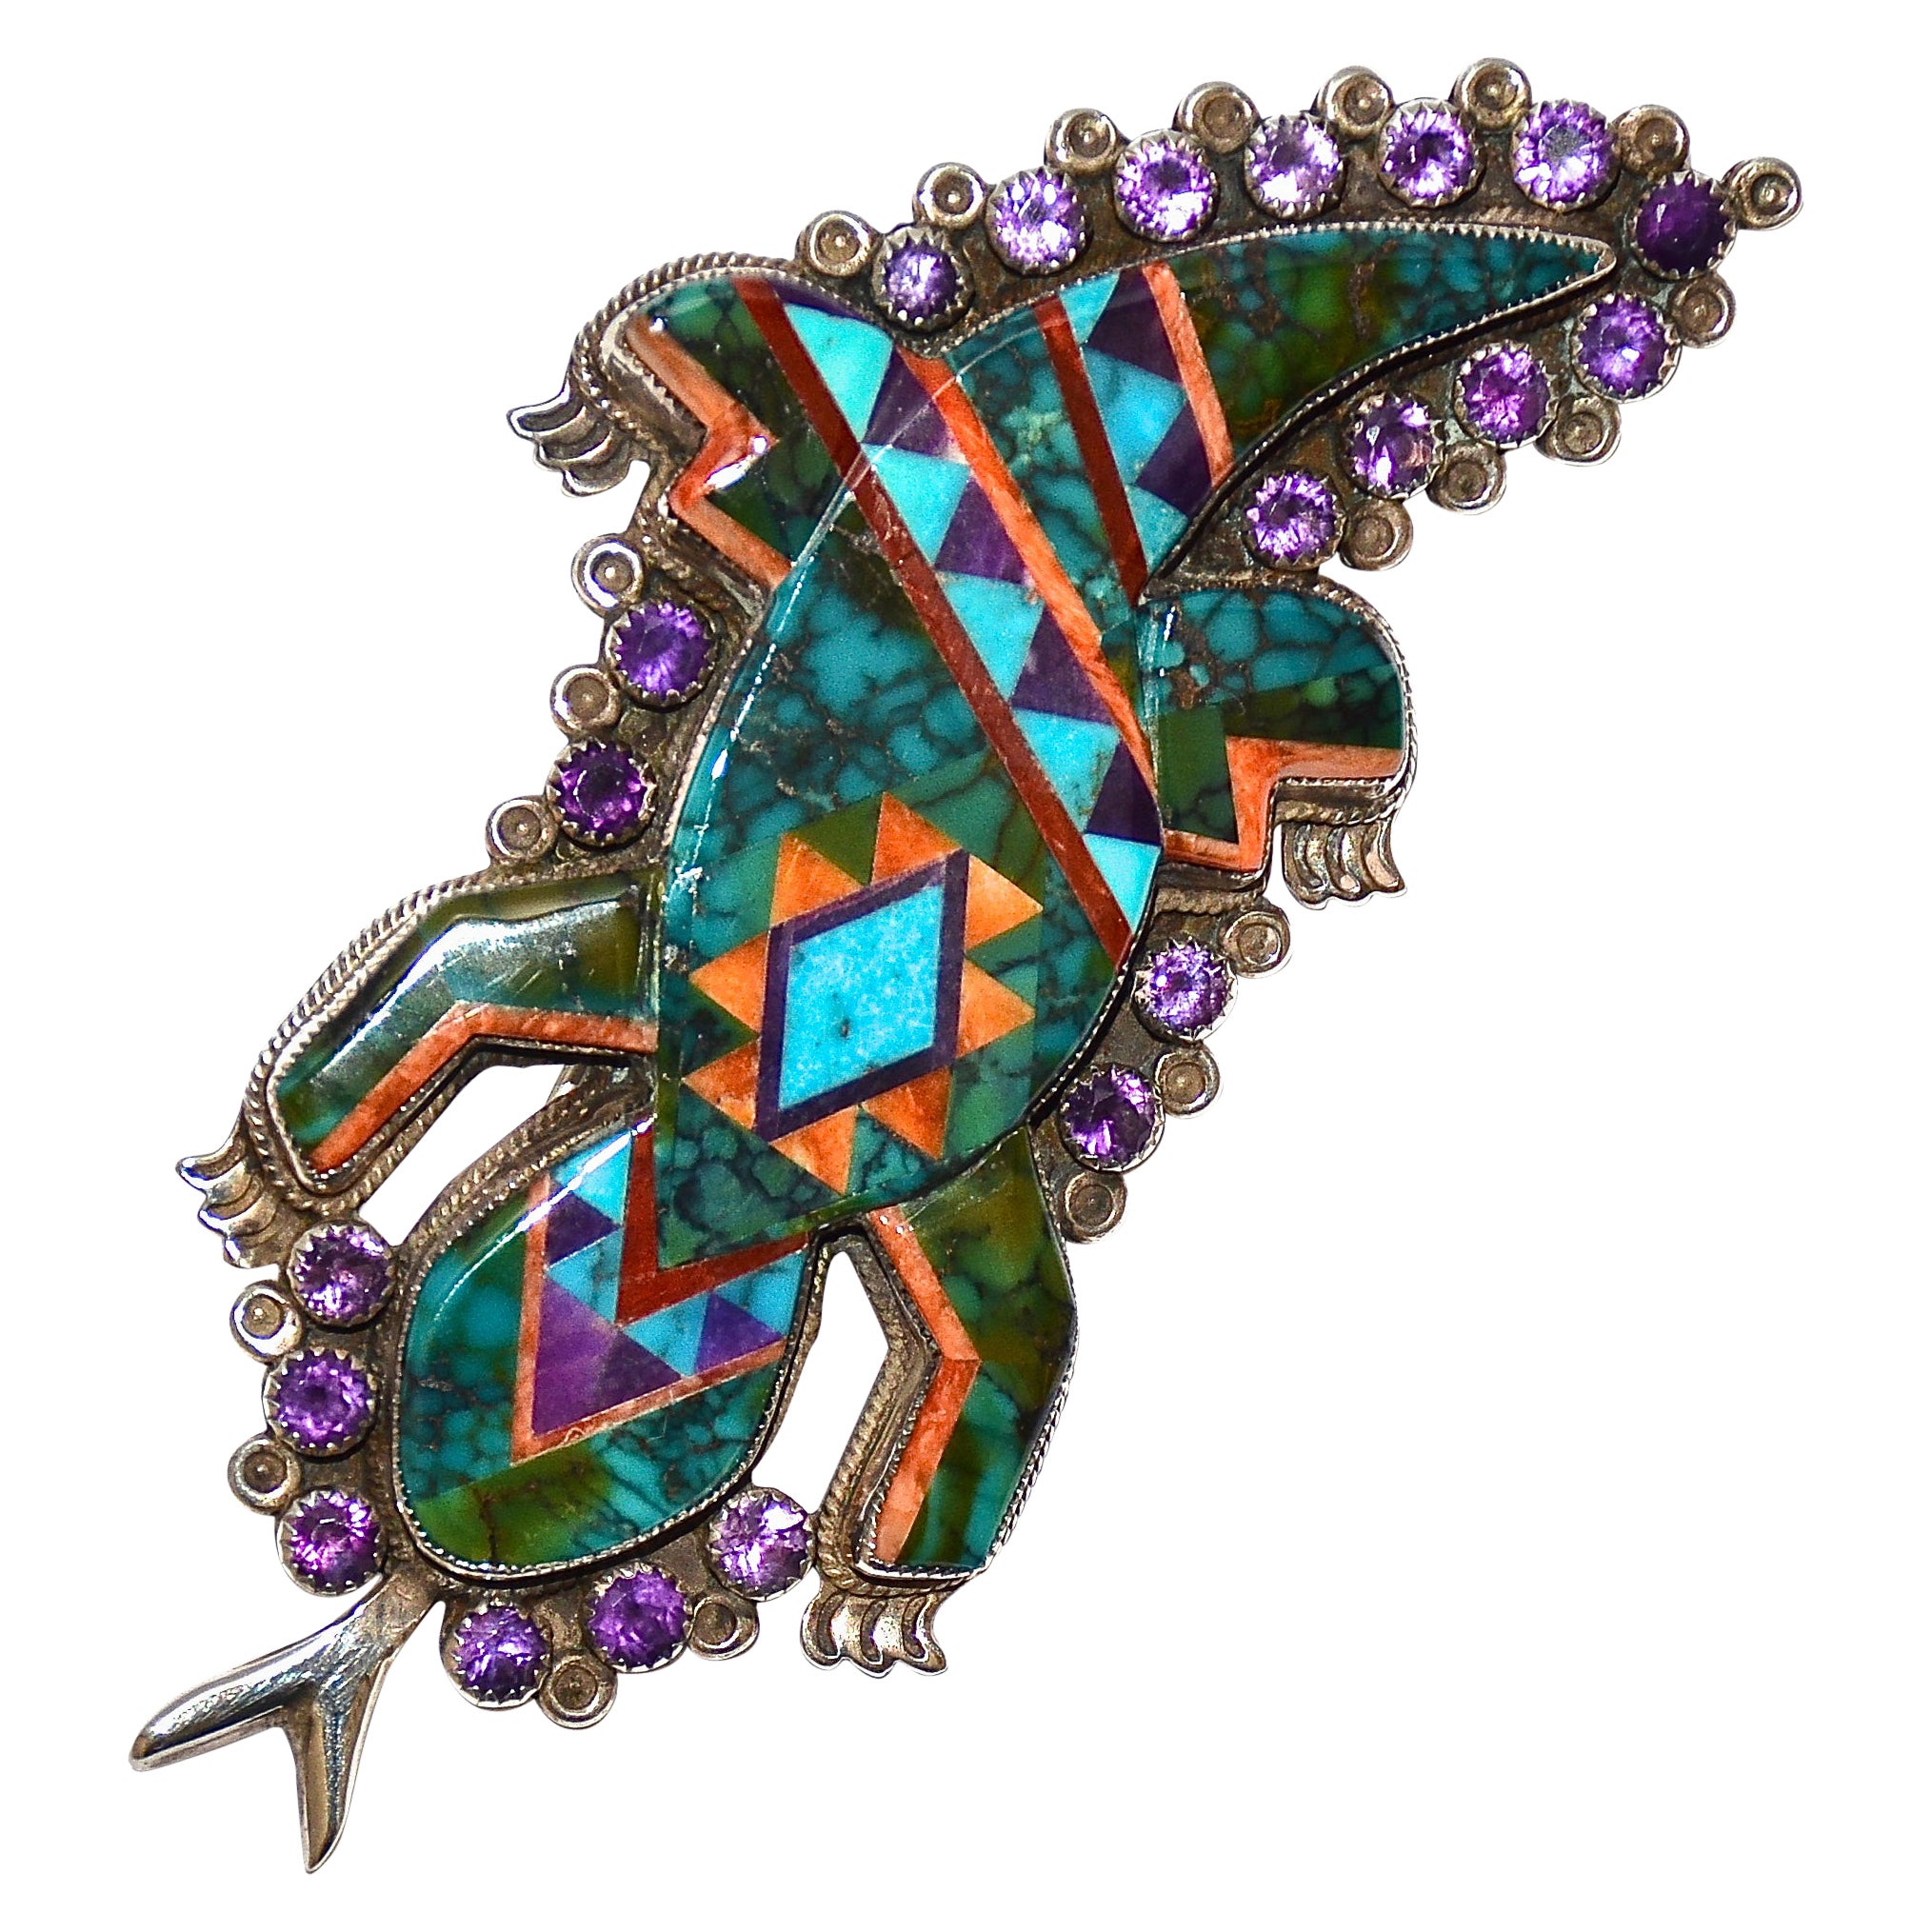 Multi-Gemstone Inlaid One-of-a-kind Lizard Pin by Benny & Valerie Aldrich For Sale